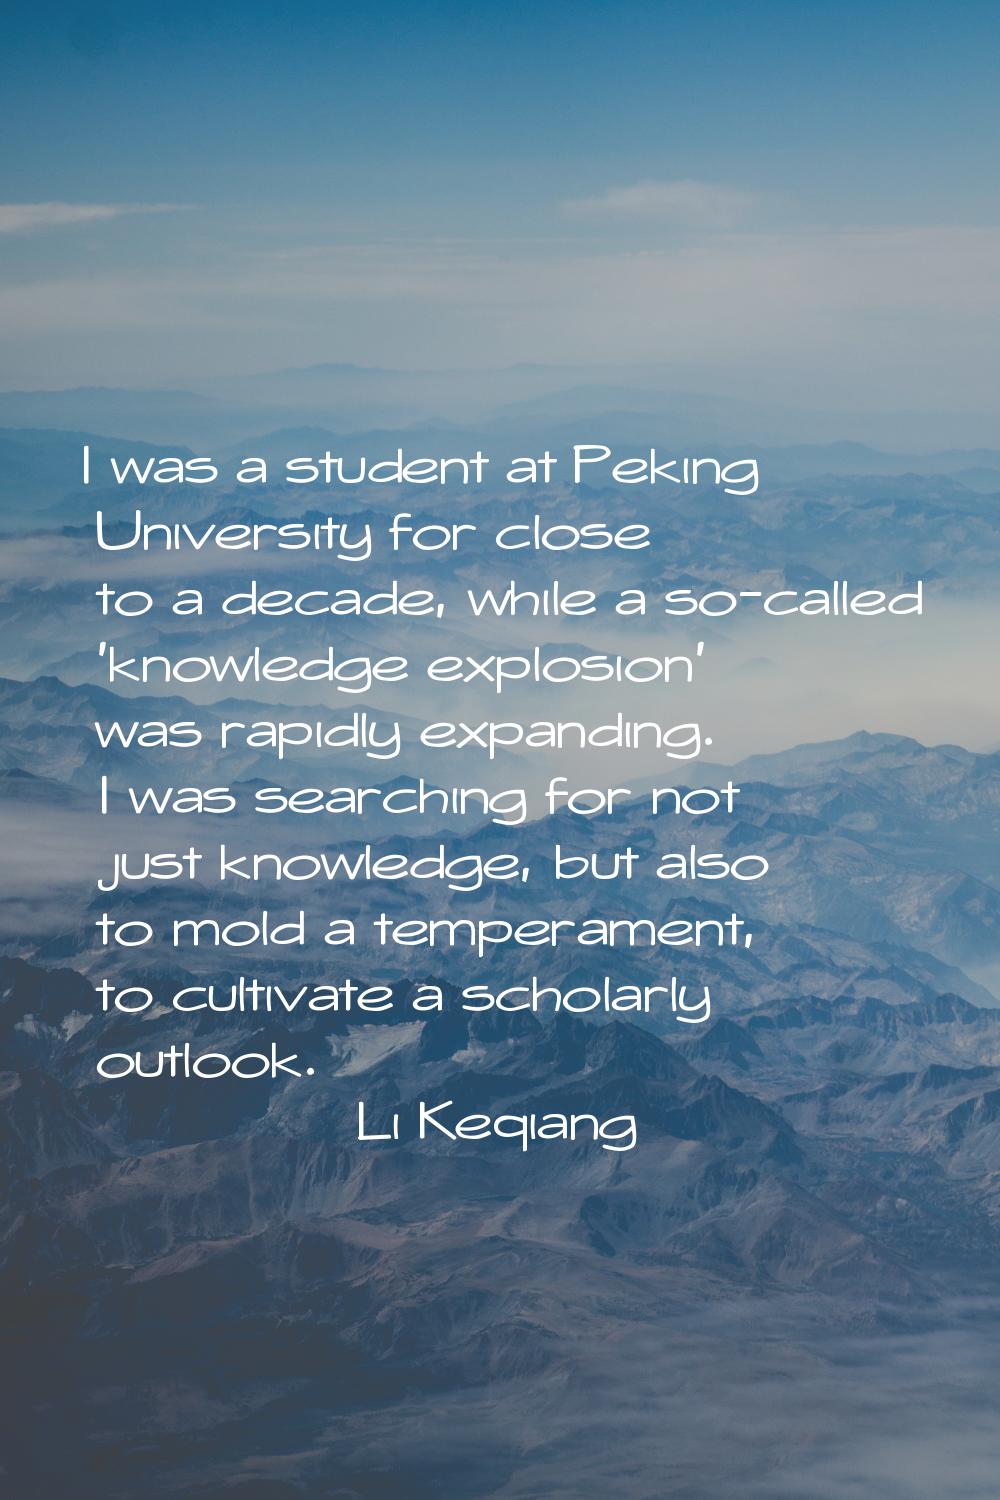 I was a student at Peking University for close to a decade, while a so-called 'knowledge explosion'